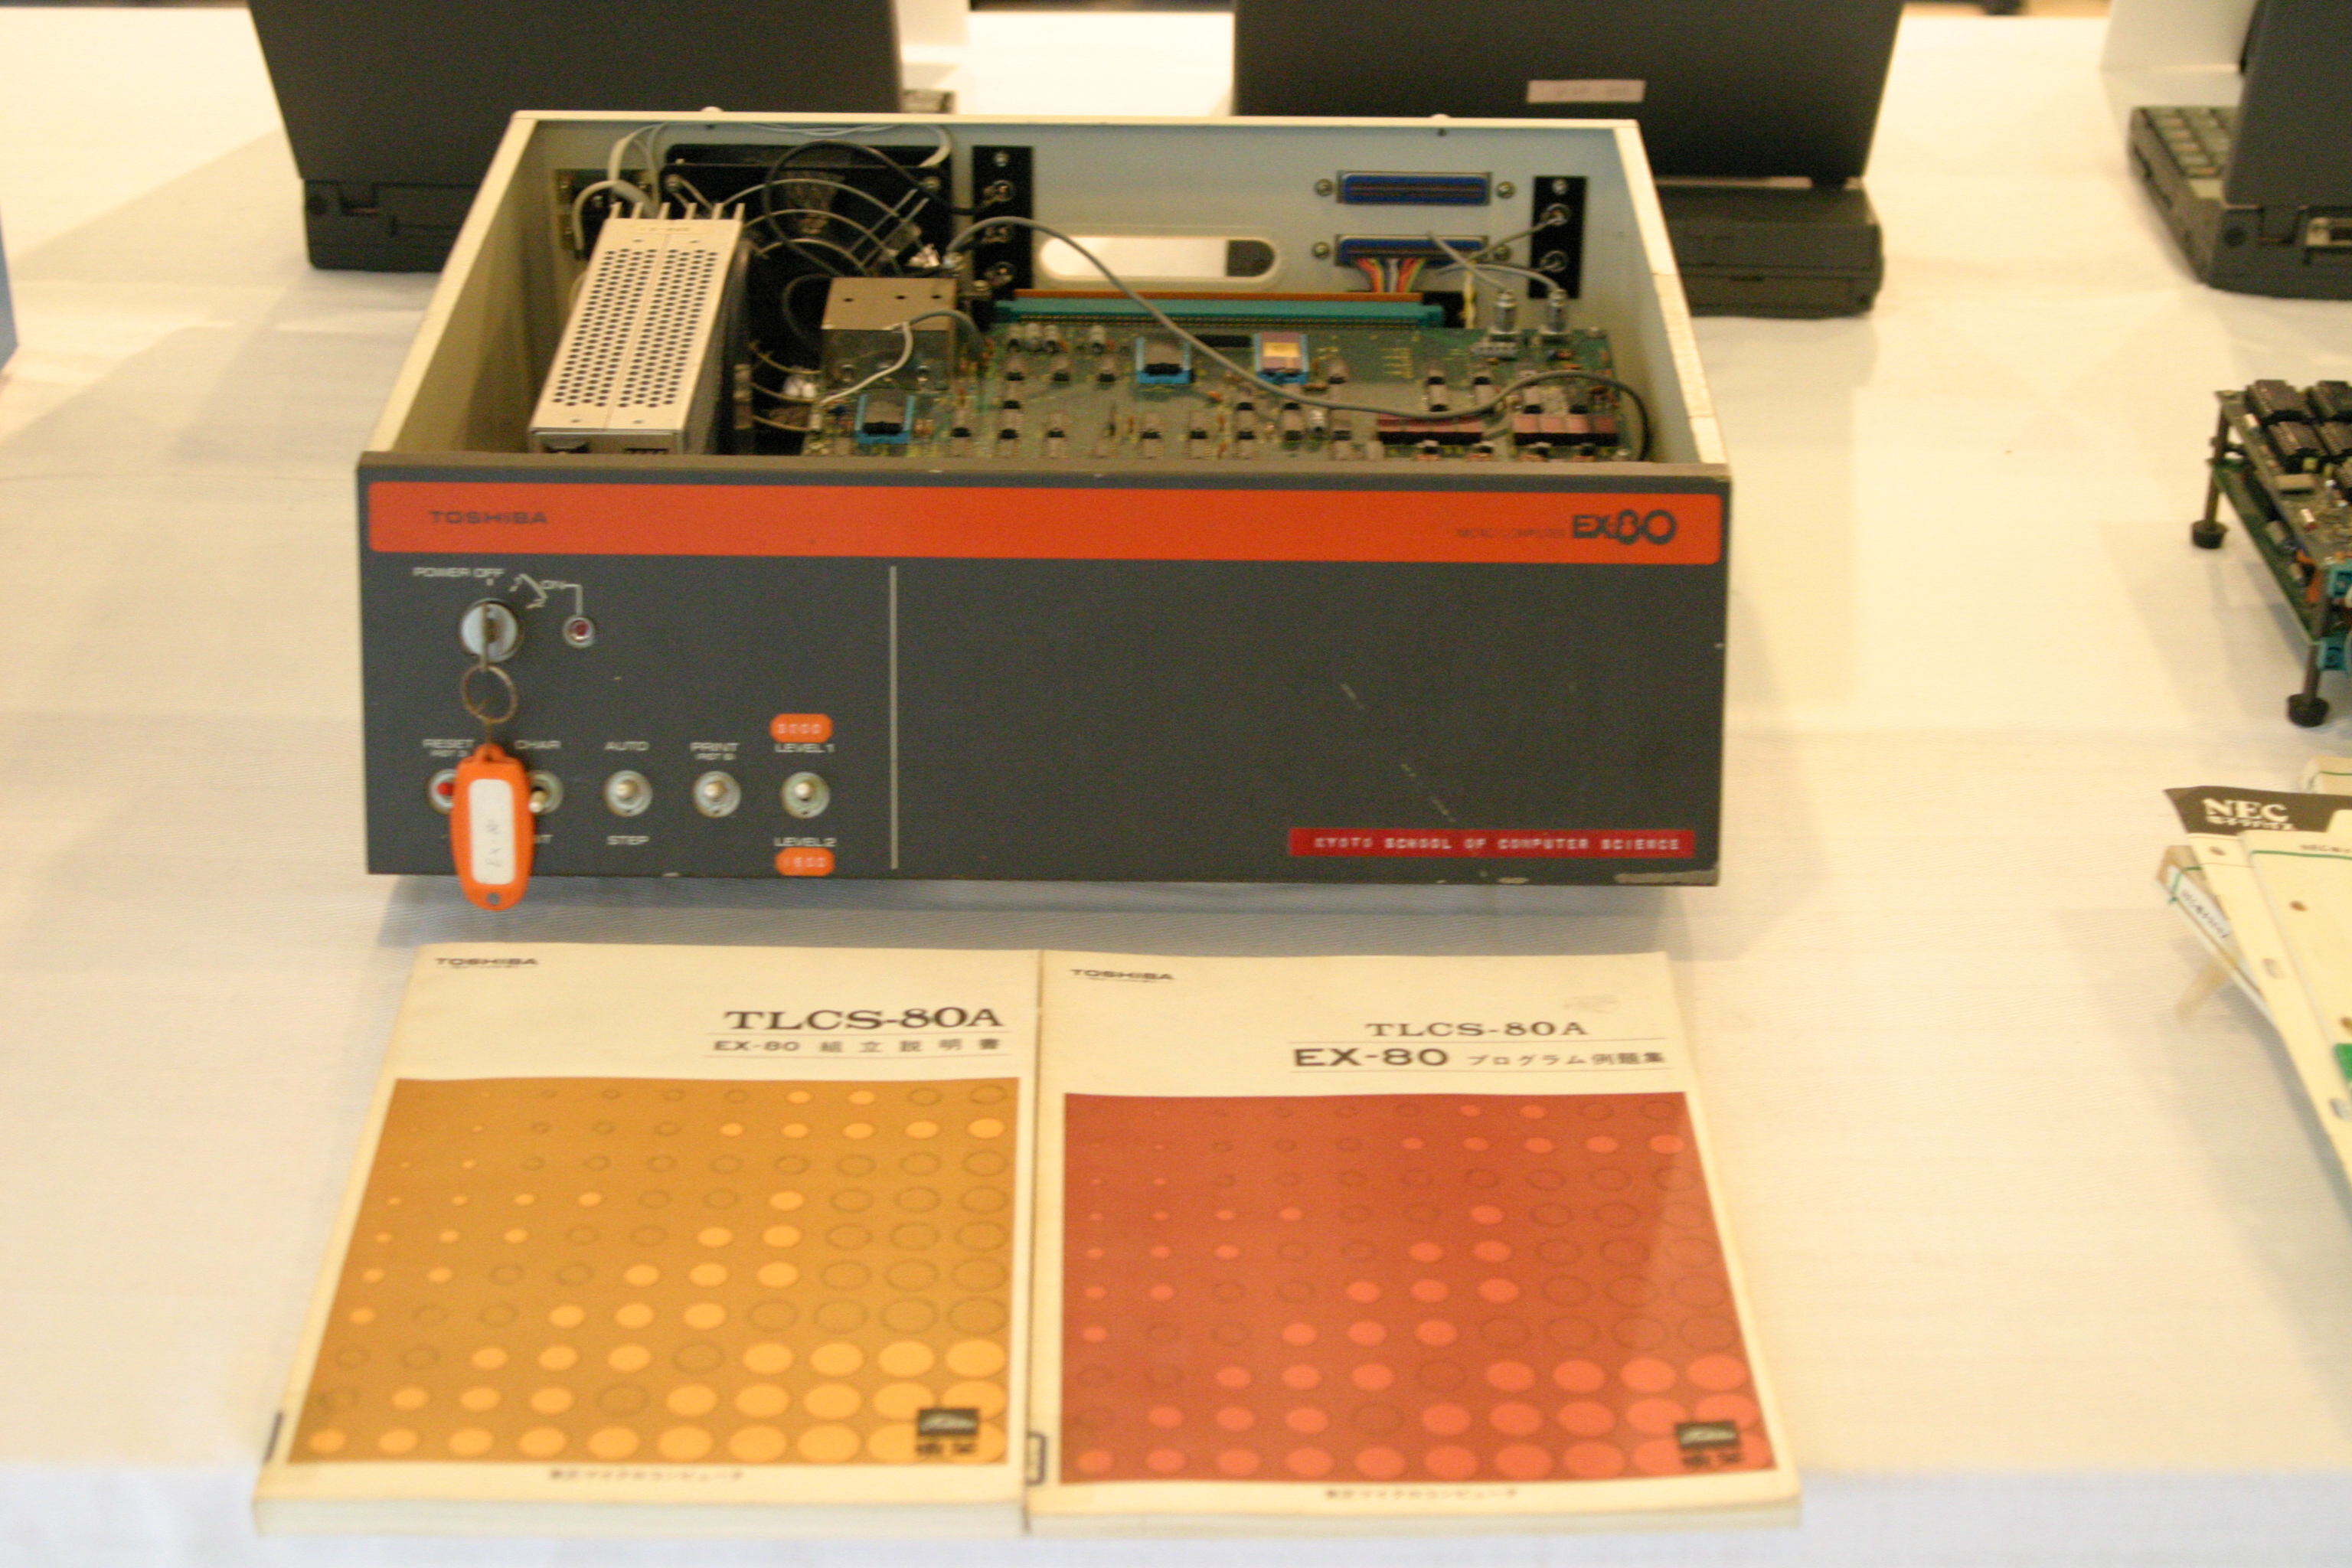 TOSHIBA | Personal Computers | KCG Computer Museum (Satellite of the